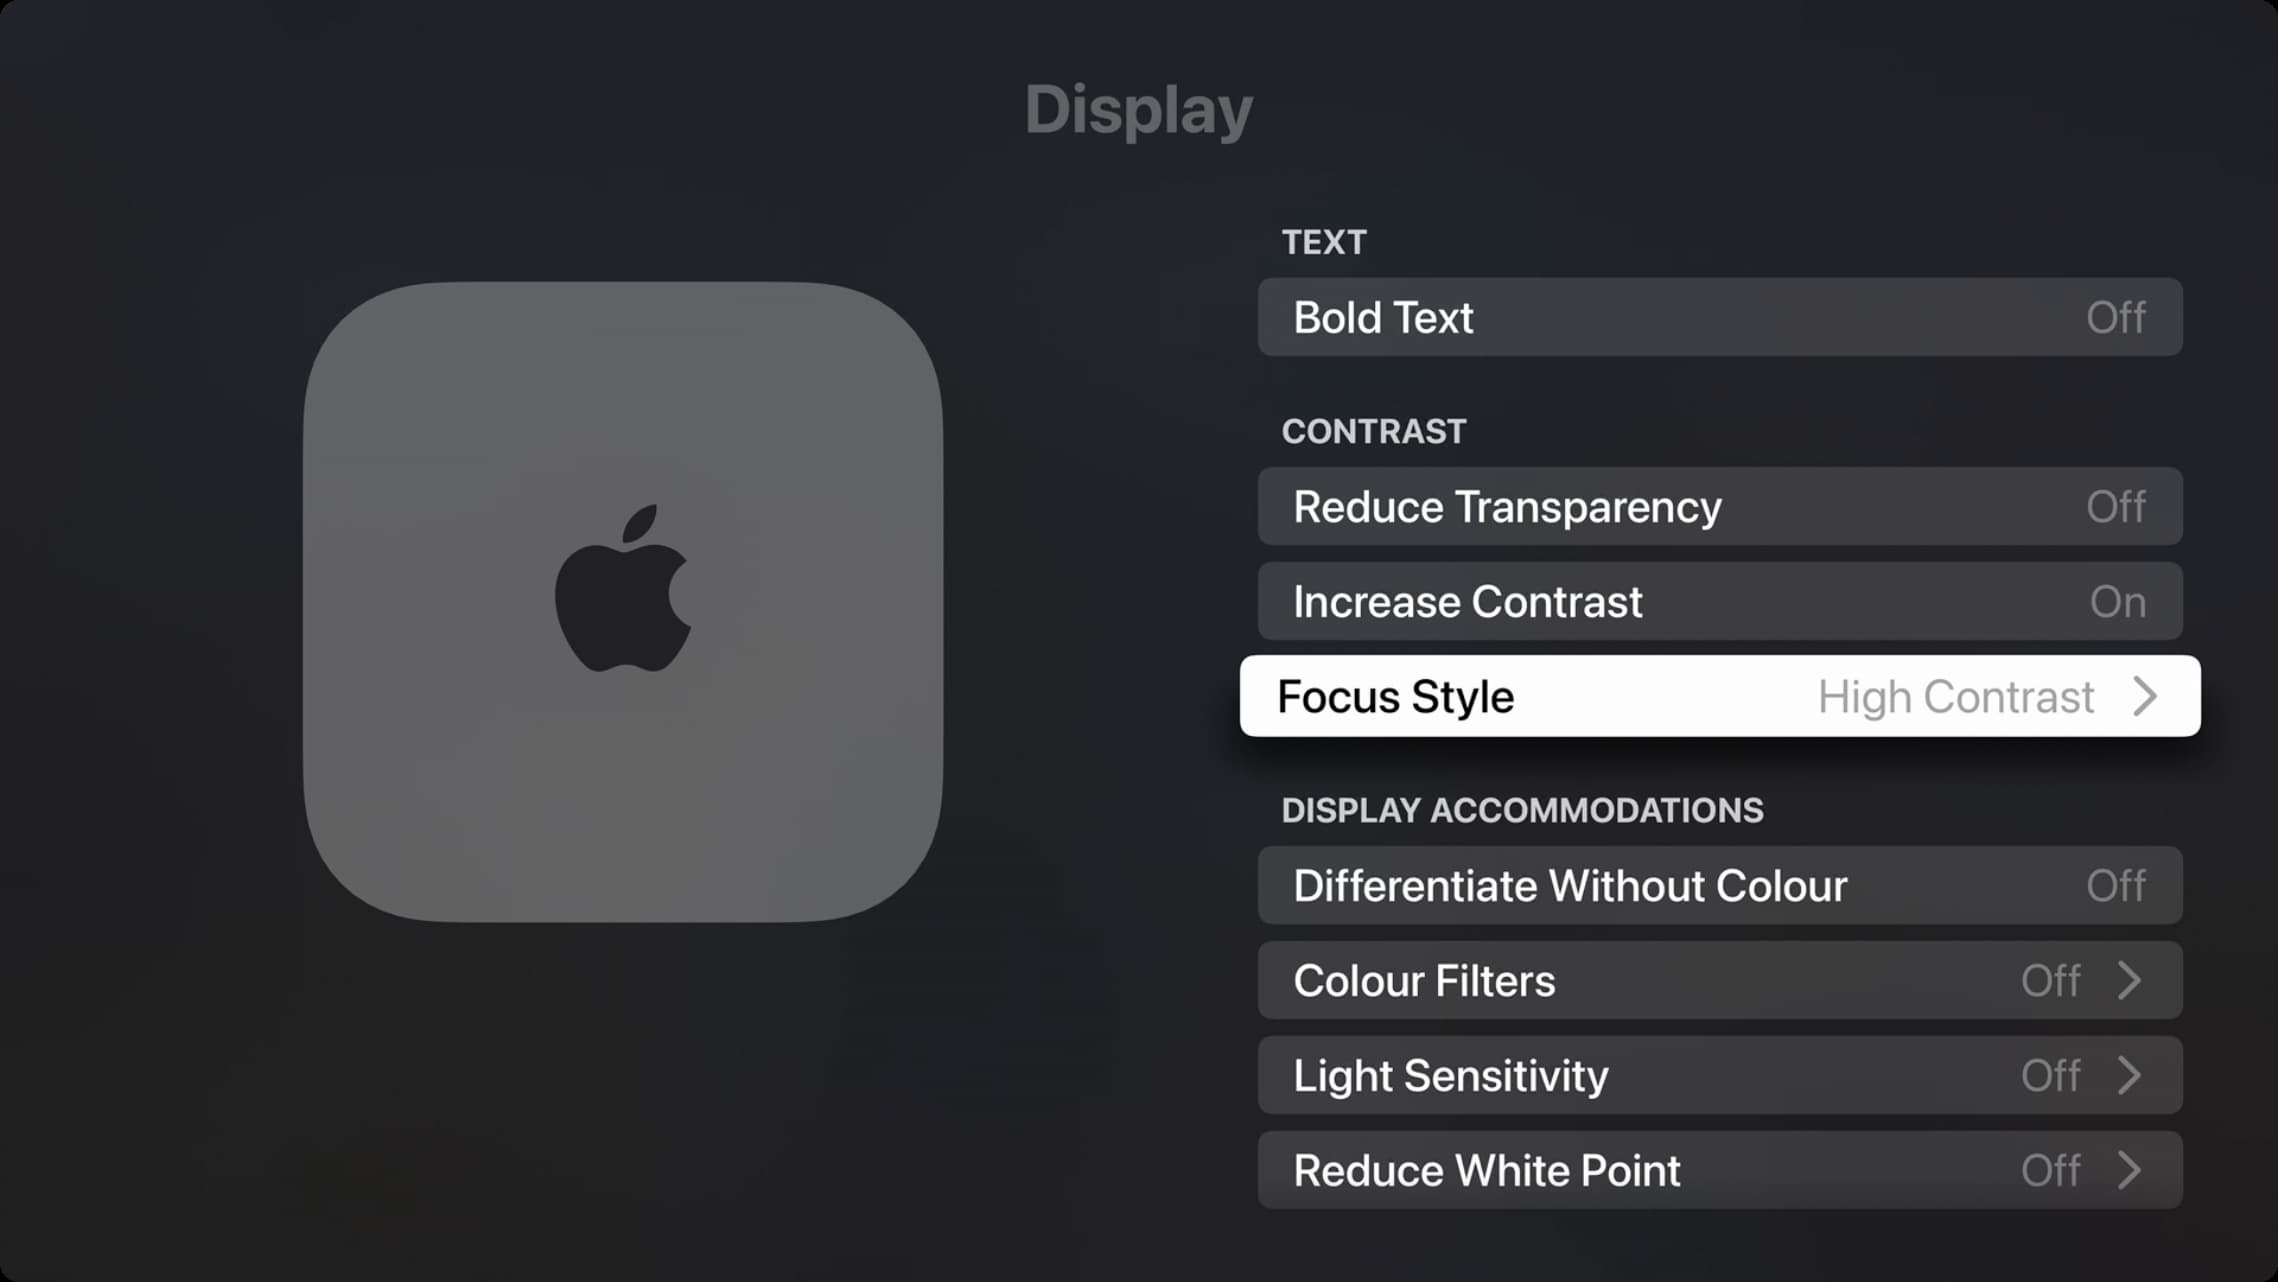 Focus Style set to High Contrast in Apple TV settings